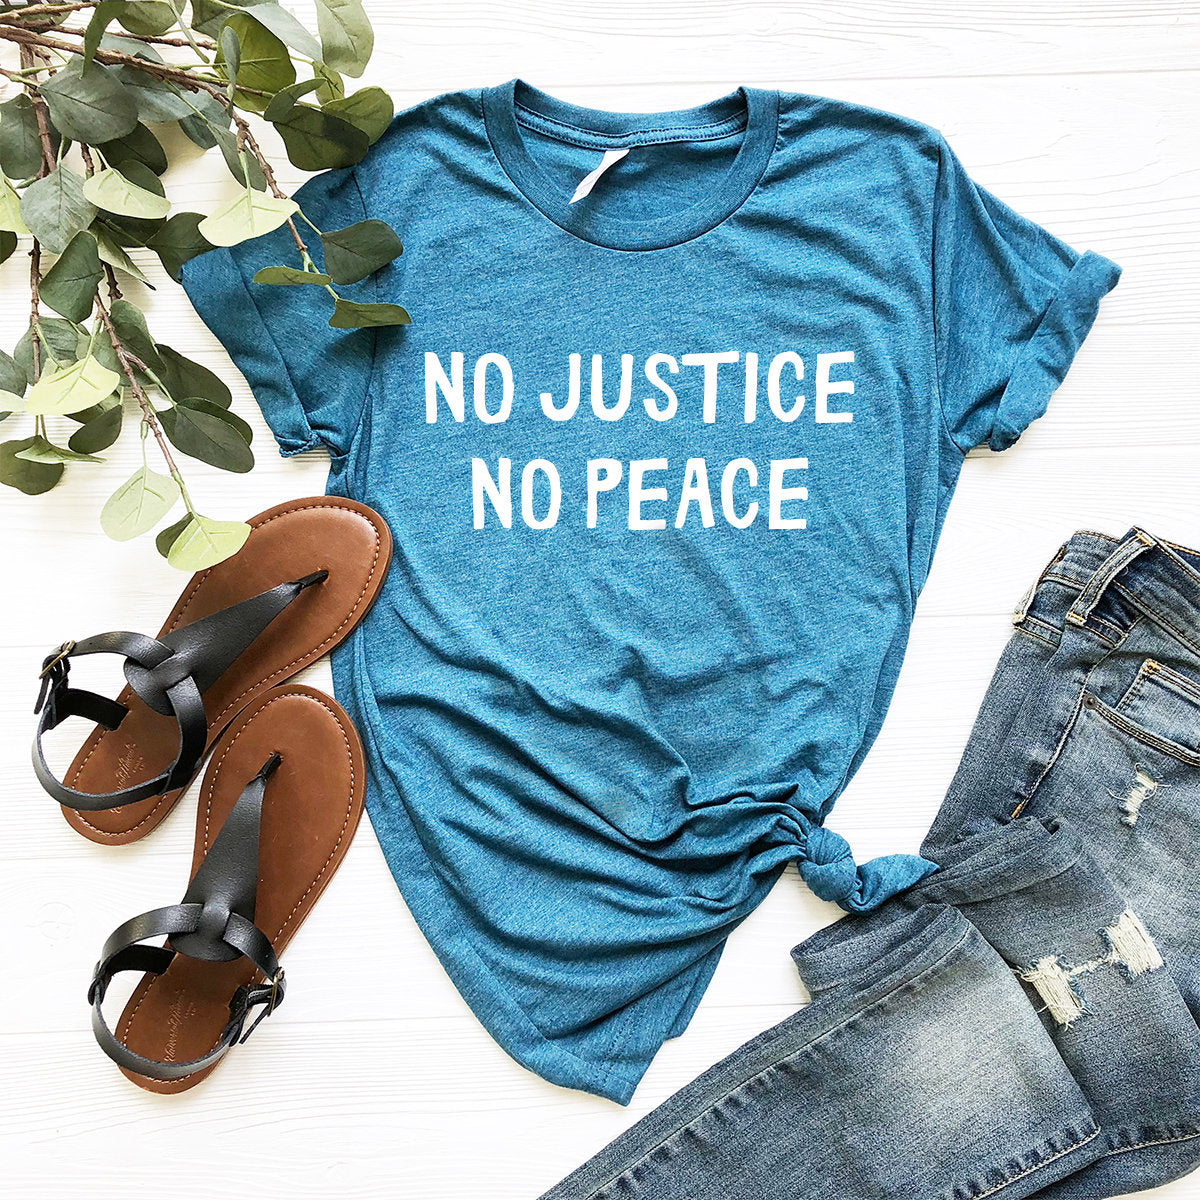 Racial Equality Shirt, Justice Tee,No Justice No Peace T-Shirt, George Floyd Shirt, Lives Matter Shirt, I Can't Breathe Shirt - Fastdeliverytees.com